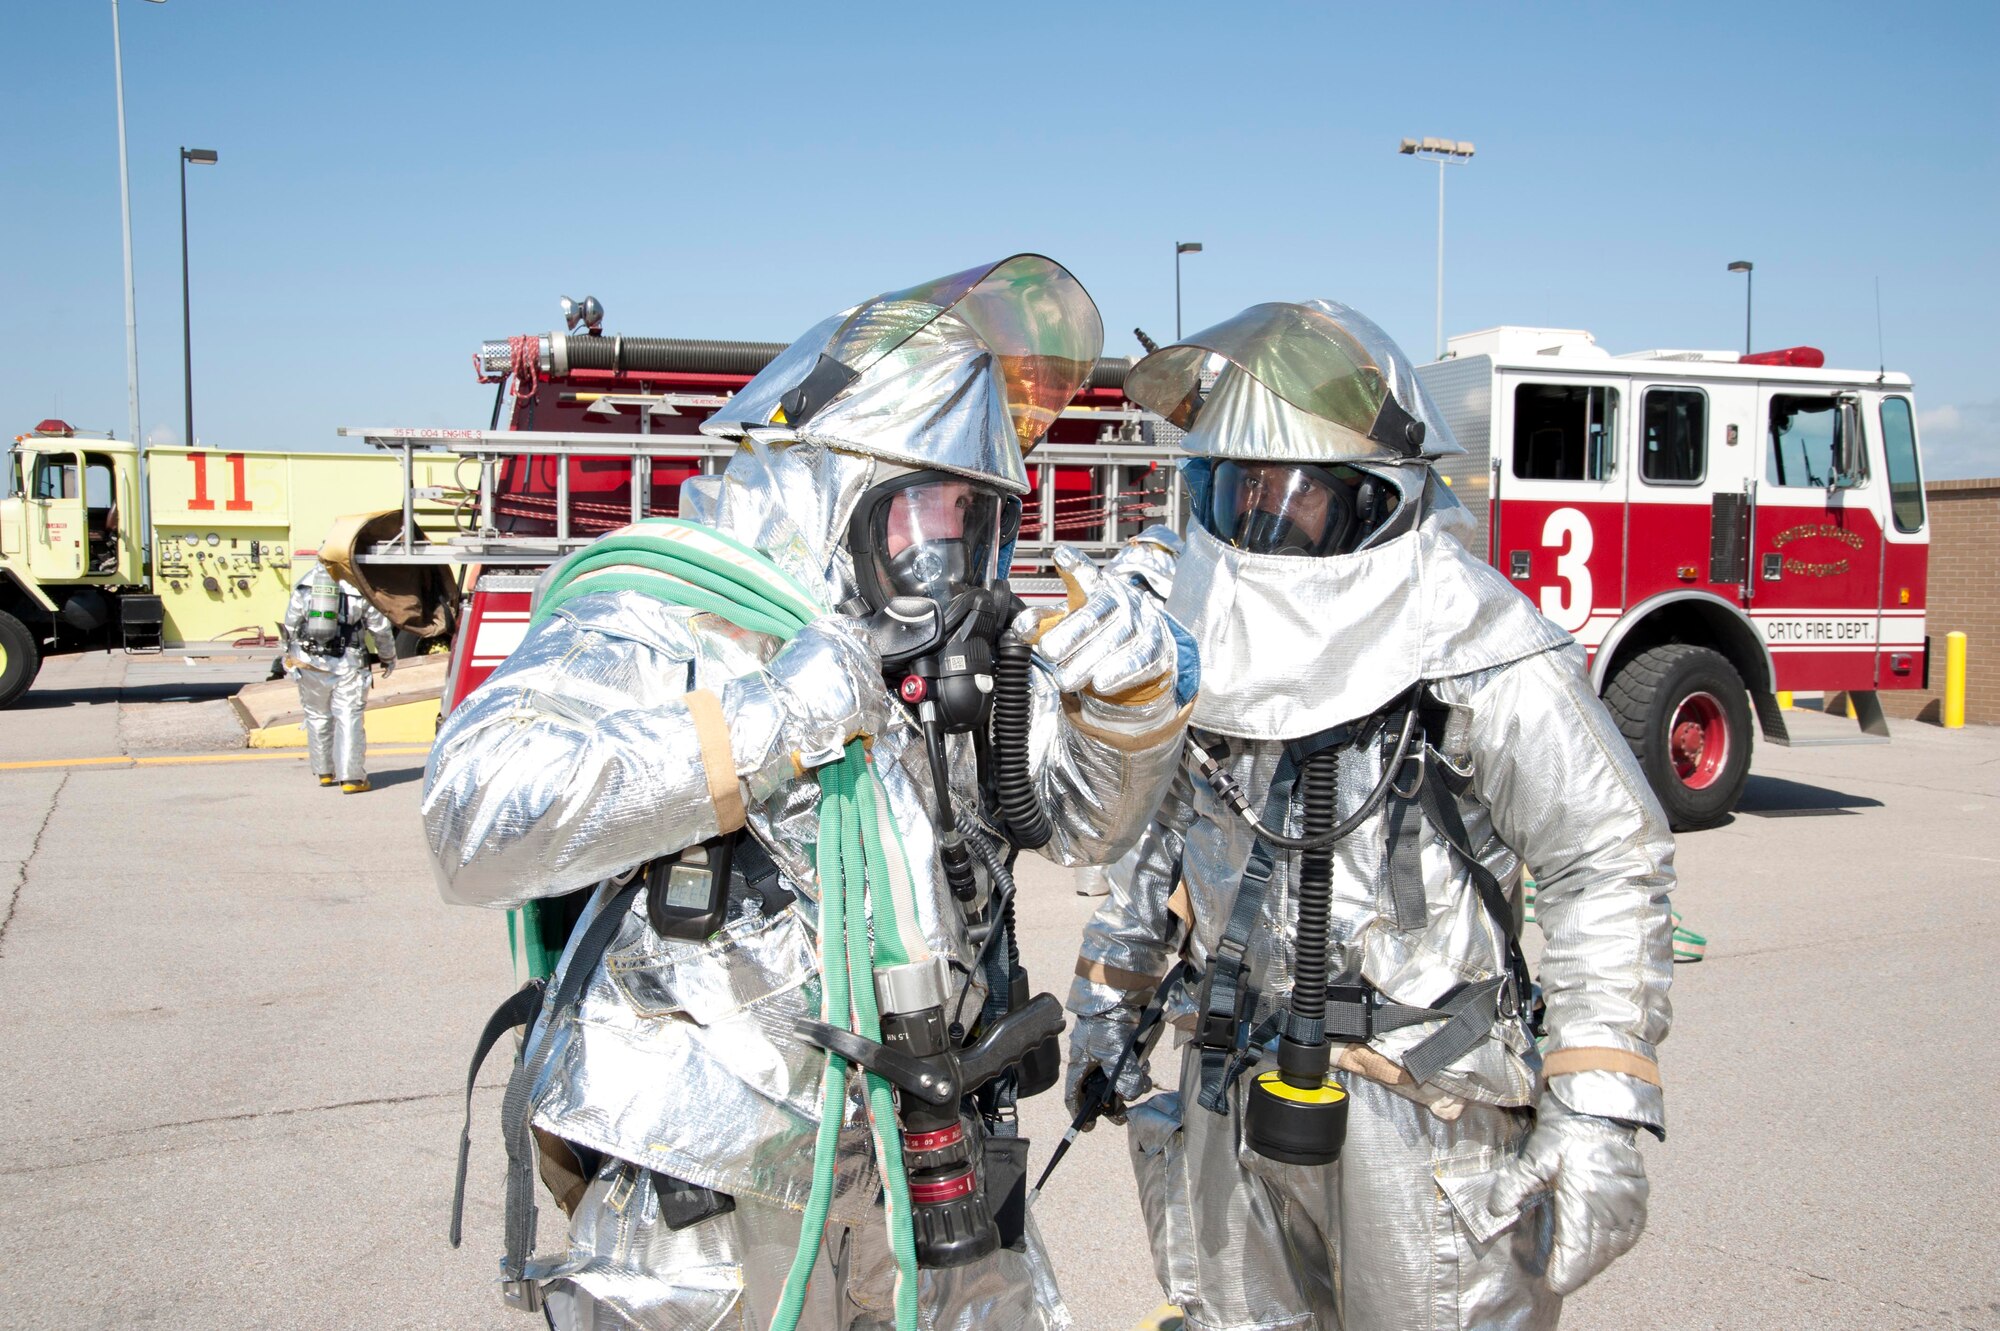 During the April unit training assembly, Senior Airman Earl Jordan (left) and Tech. Sgt. Michael Coleman, 403rd Civil Engineer Squadron fire fighters, prepare to investigate a building during a structural fire exercise at the Air National Guard Combat Readiness Training Center, Miss. Members from various CE career fields practice their job-specific skills during UTAs and annual tours to remain deployable for global contingencies. (U.S. Air Force photo by Tech. Sgt. Ryan Labadens)